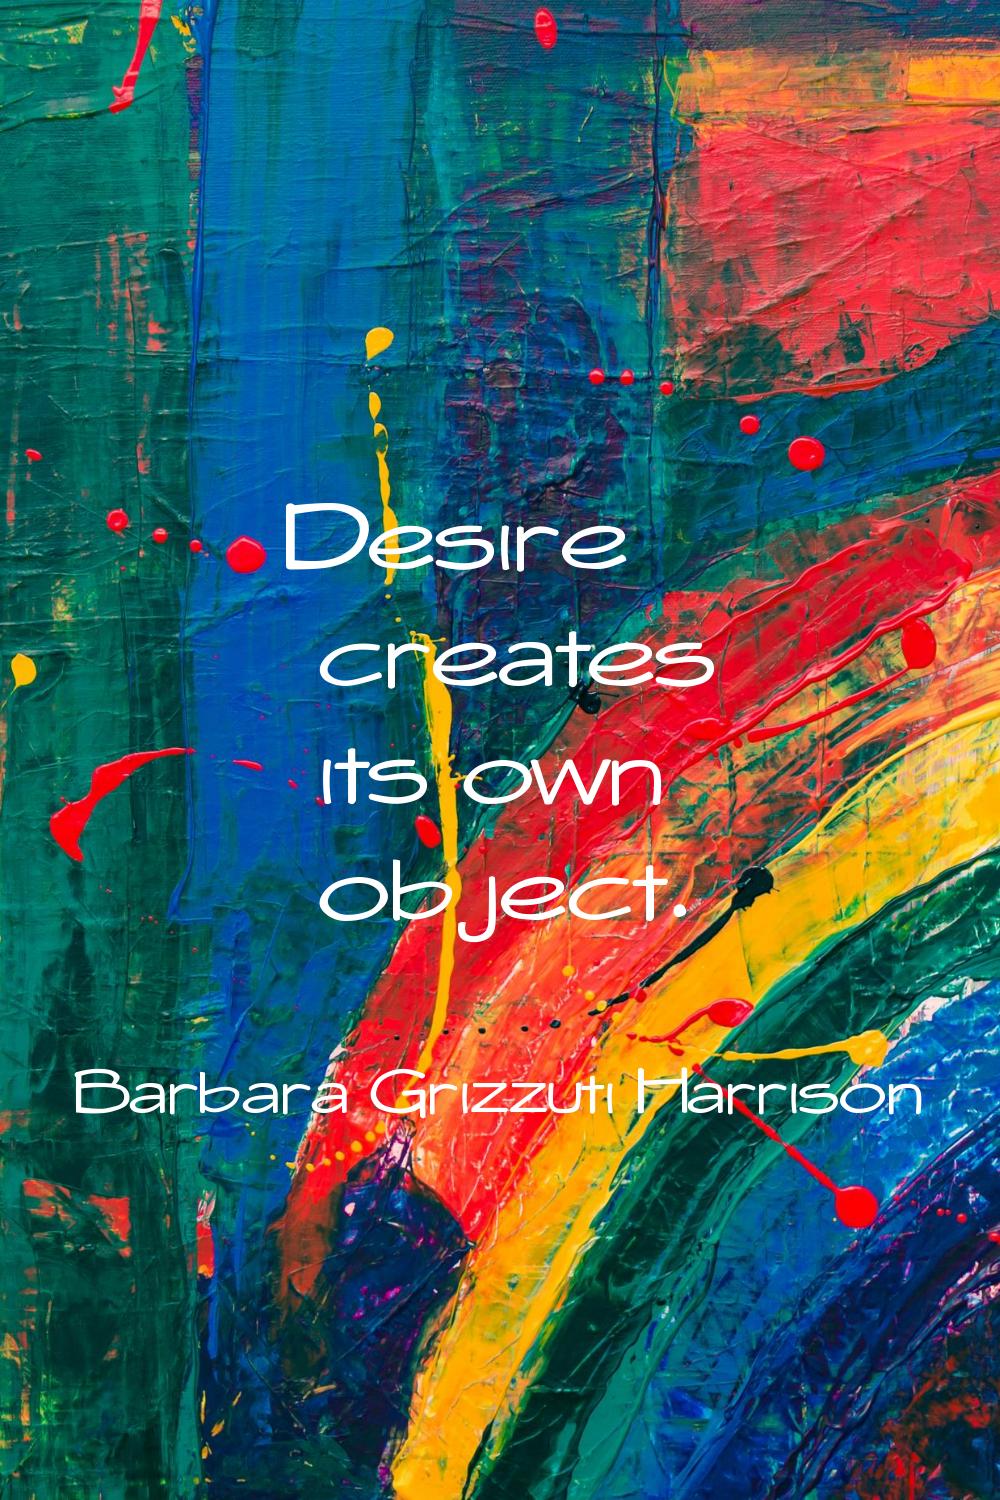 Desire creates its own object.